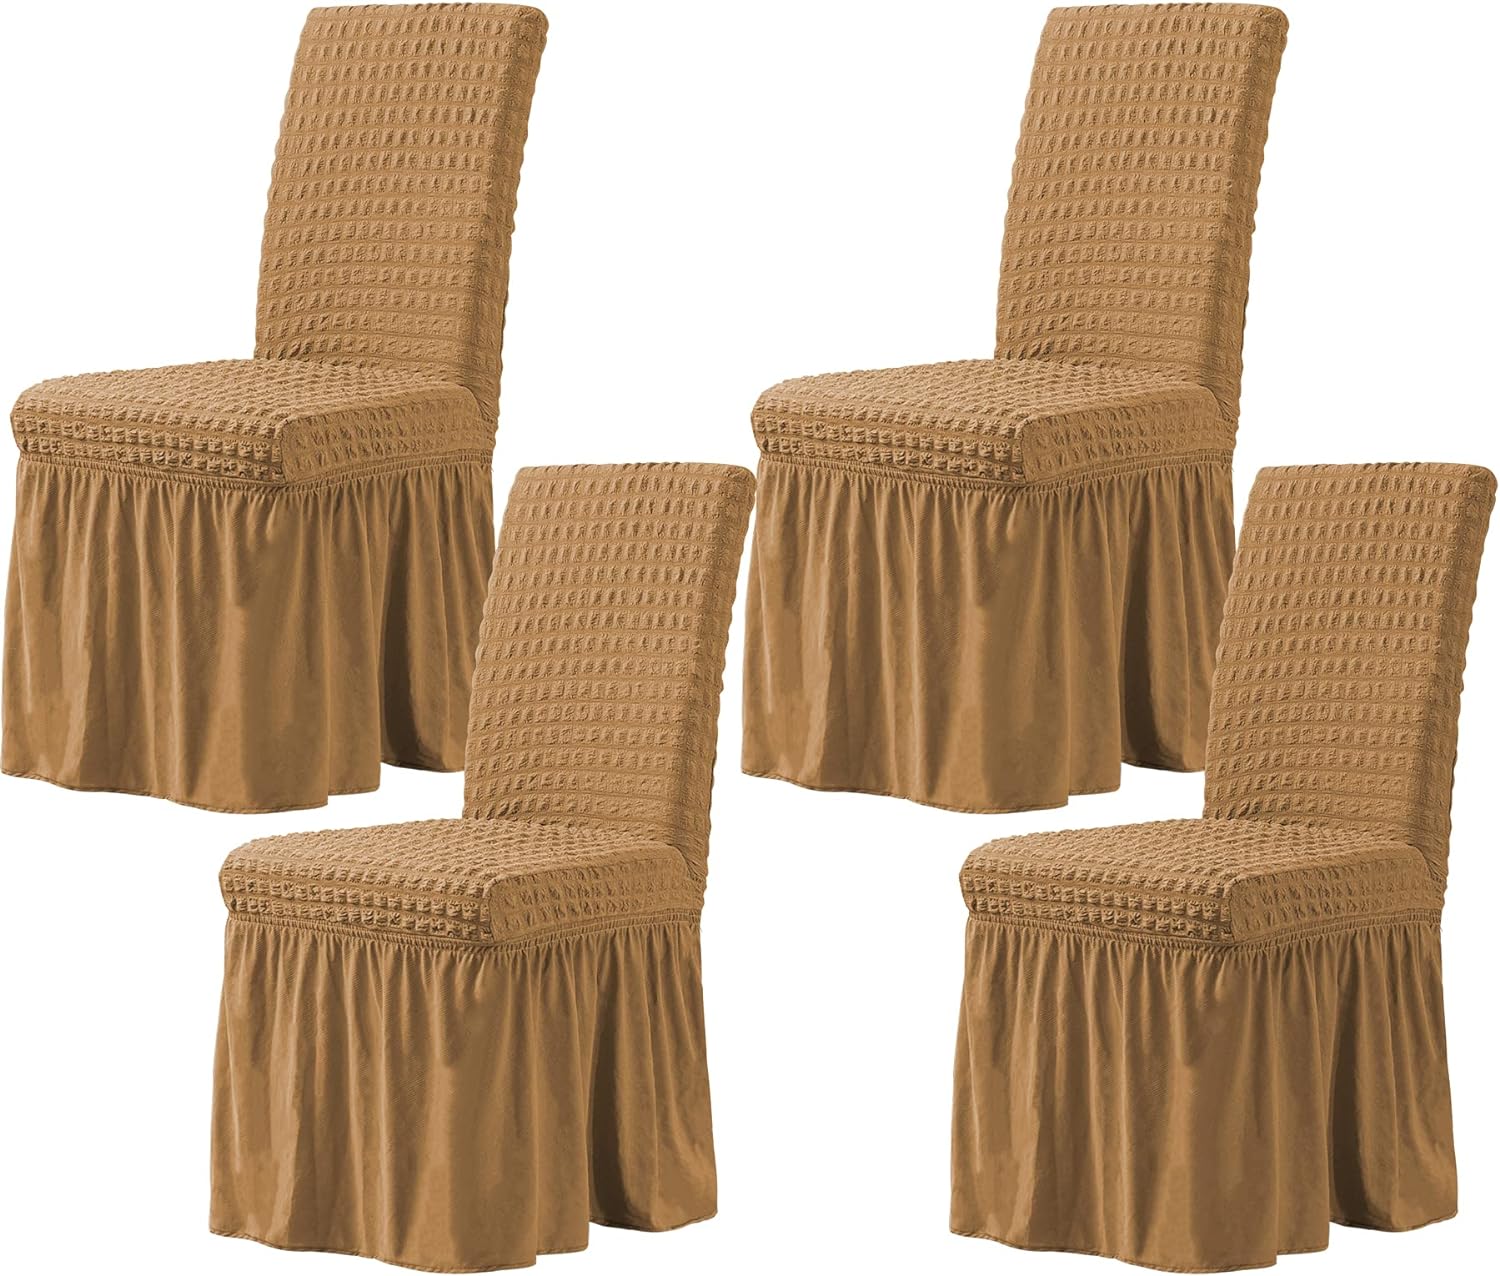 CHUN YI Dining Chair Covers Set of 4, Universal Stretch Dining Room Chair Covers with Skirt, Removable Parsons Chair Slipcover for Kitchen Wedding Party Banquet (Almond)